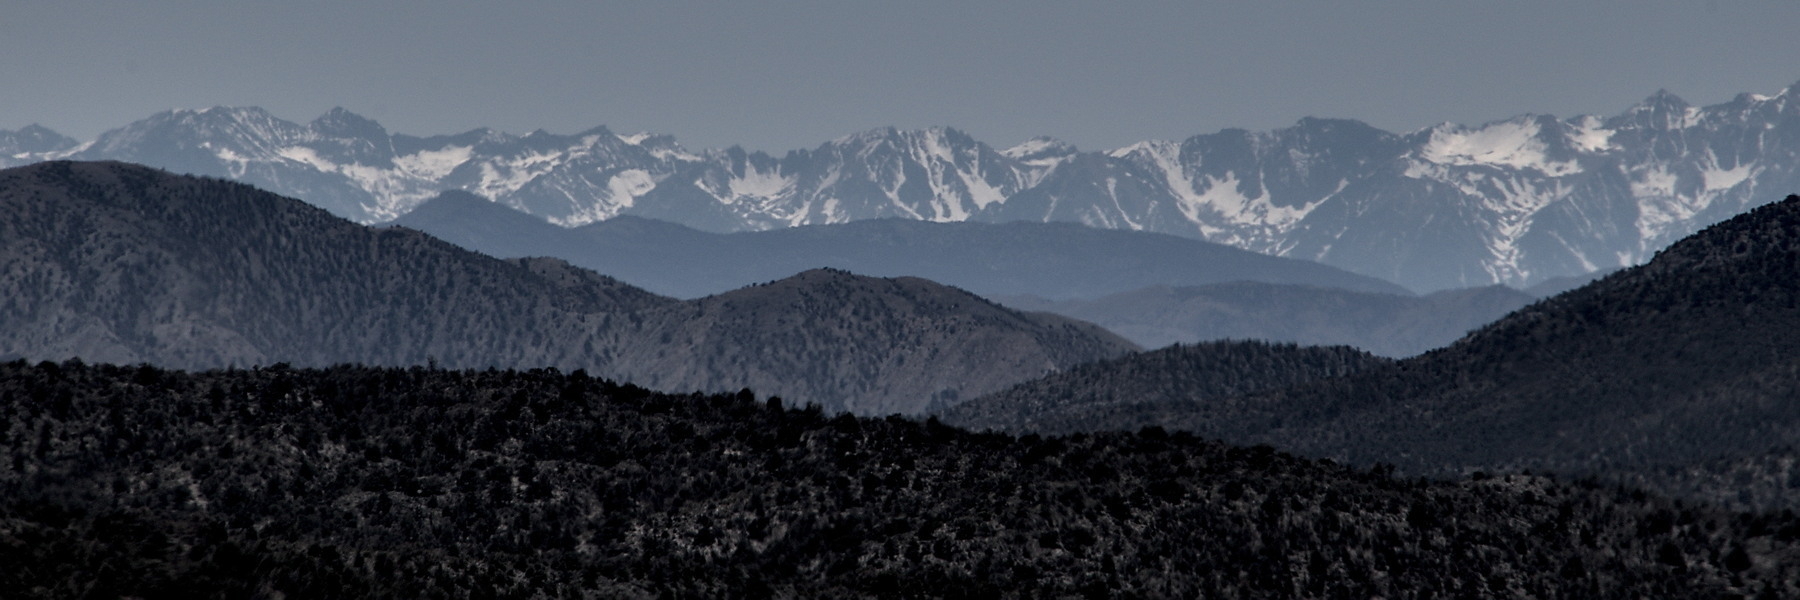 Layers of mountains receding into the distance. The last range is snow-capped.